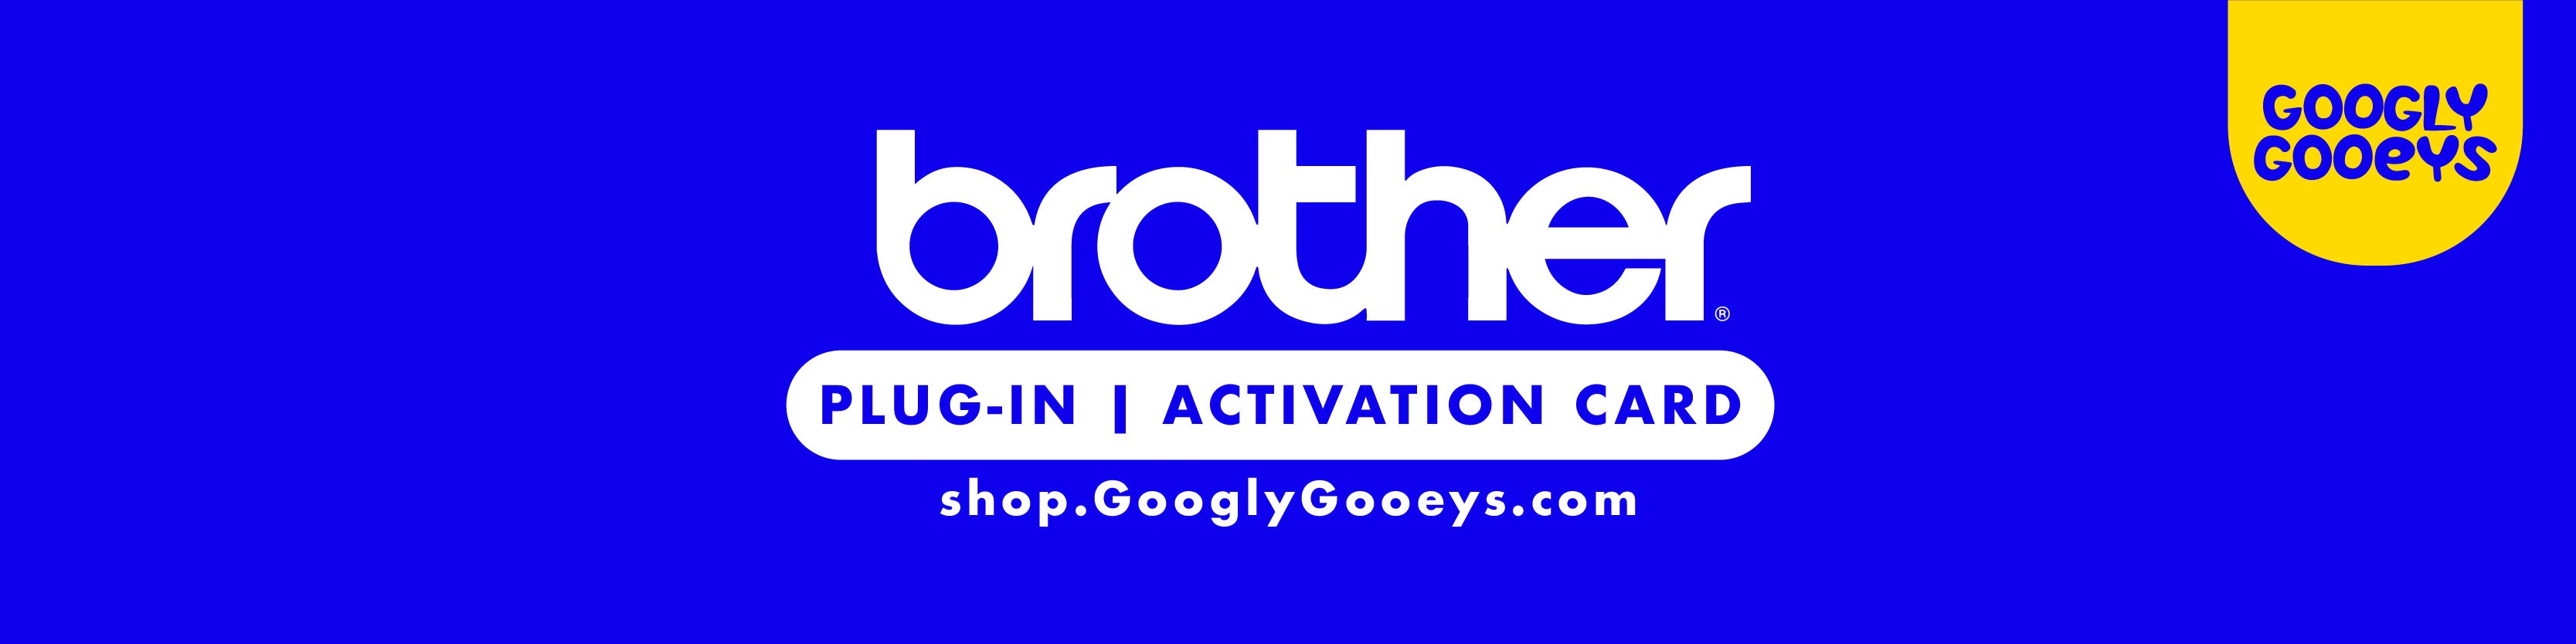 Googly Gooeys Shop - Brother Plug-in Activation Card